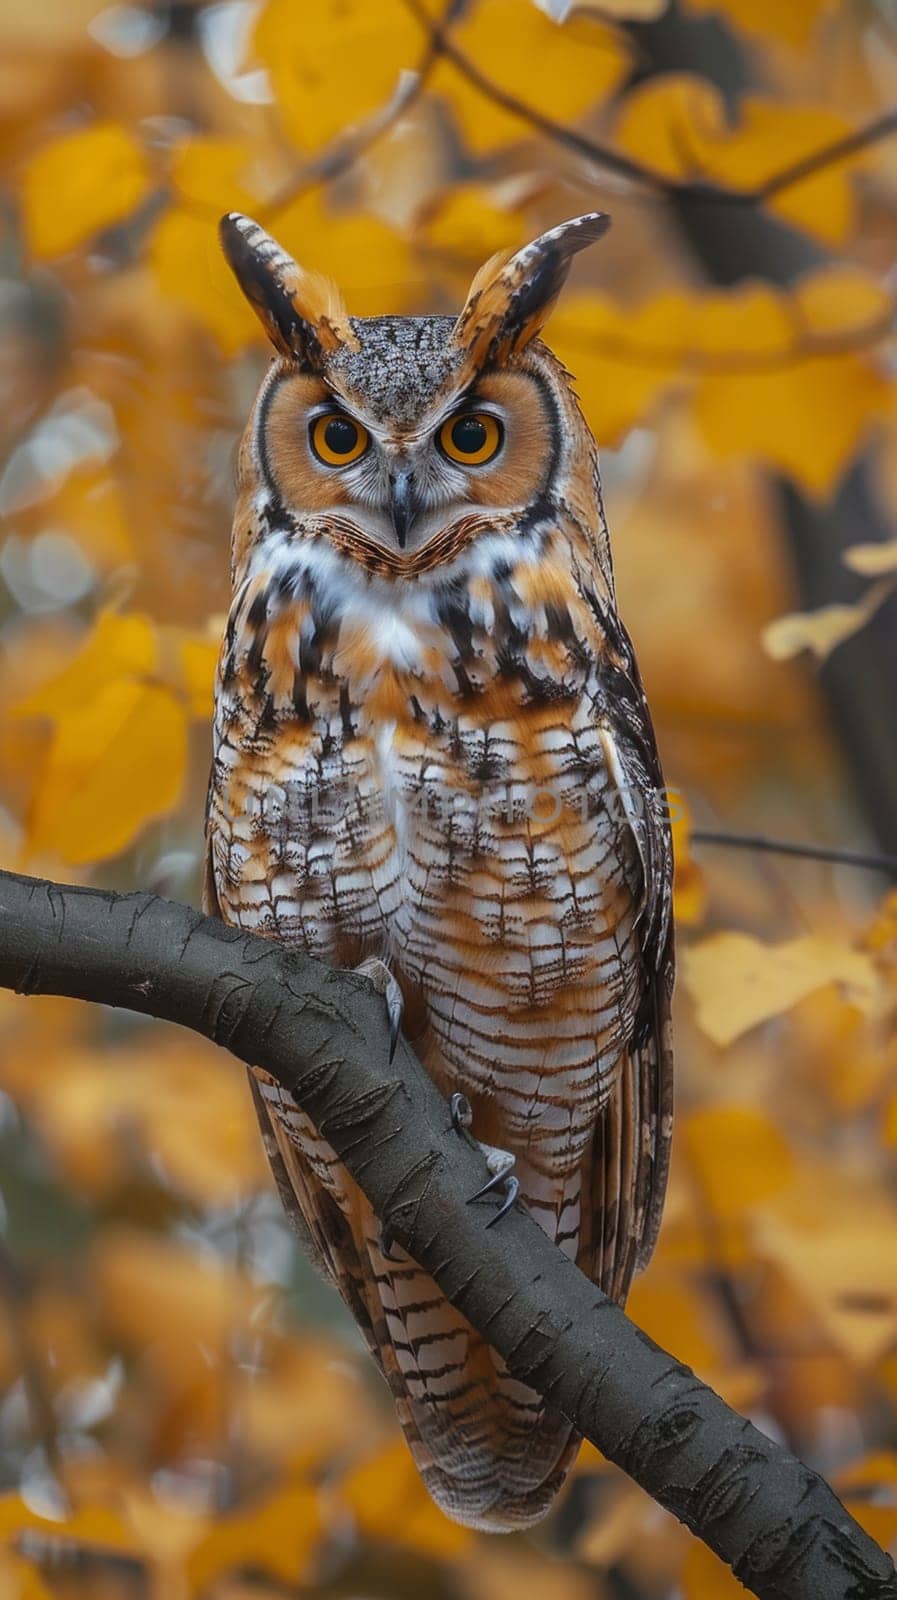 An owl perched on a branch in front of yellow leaves